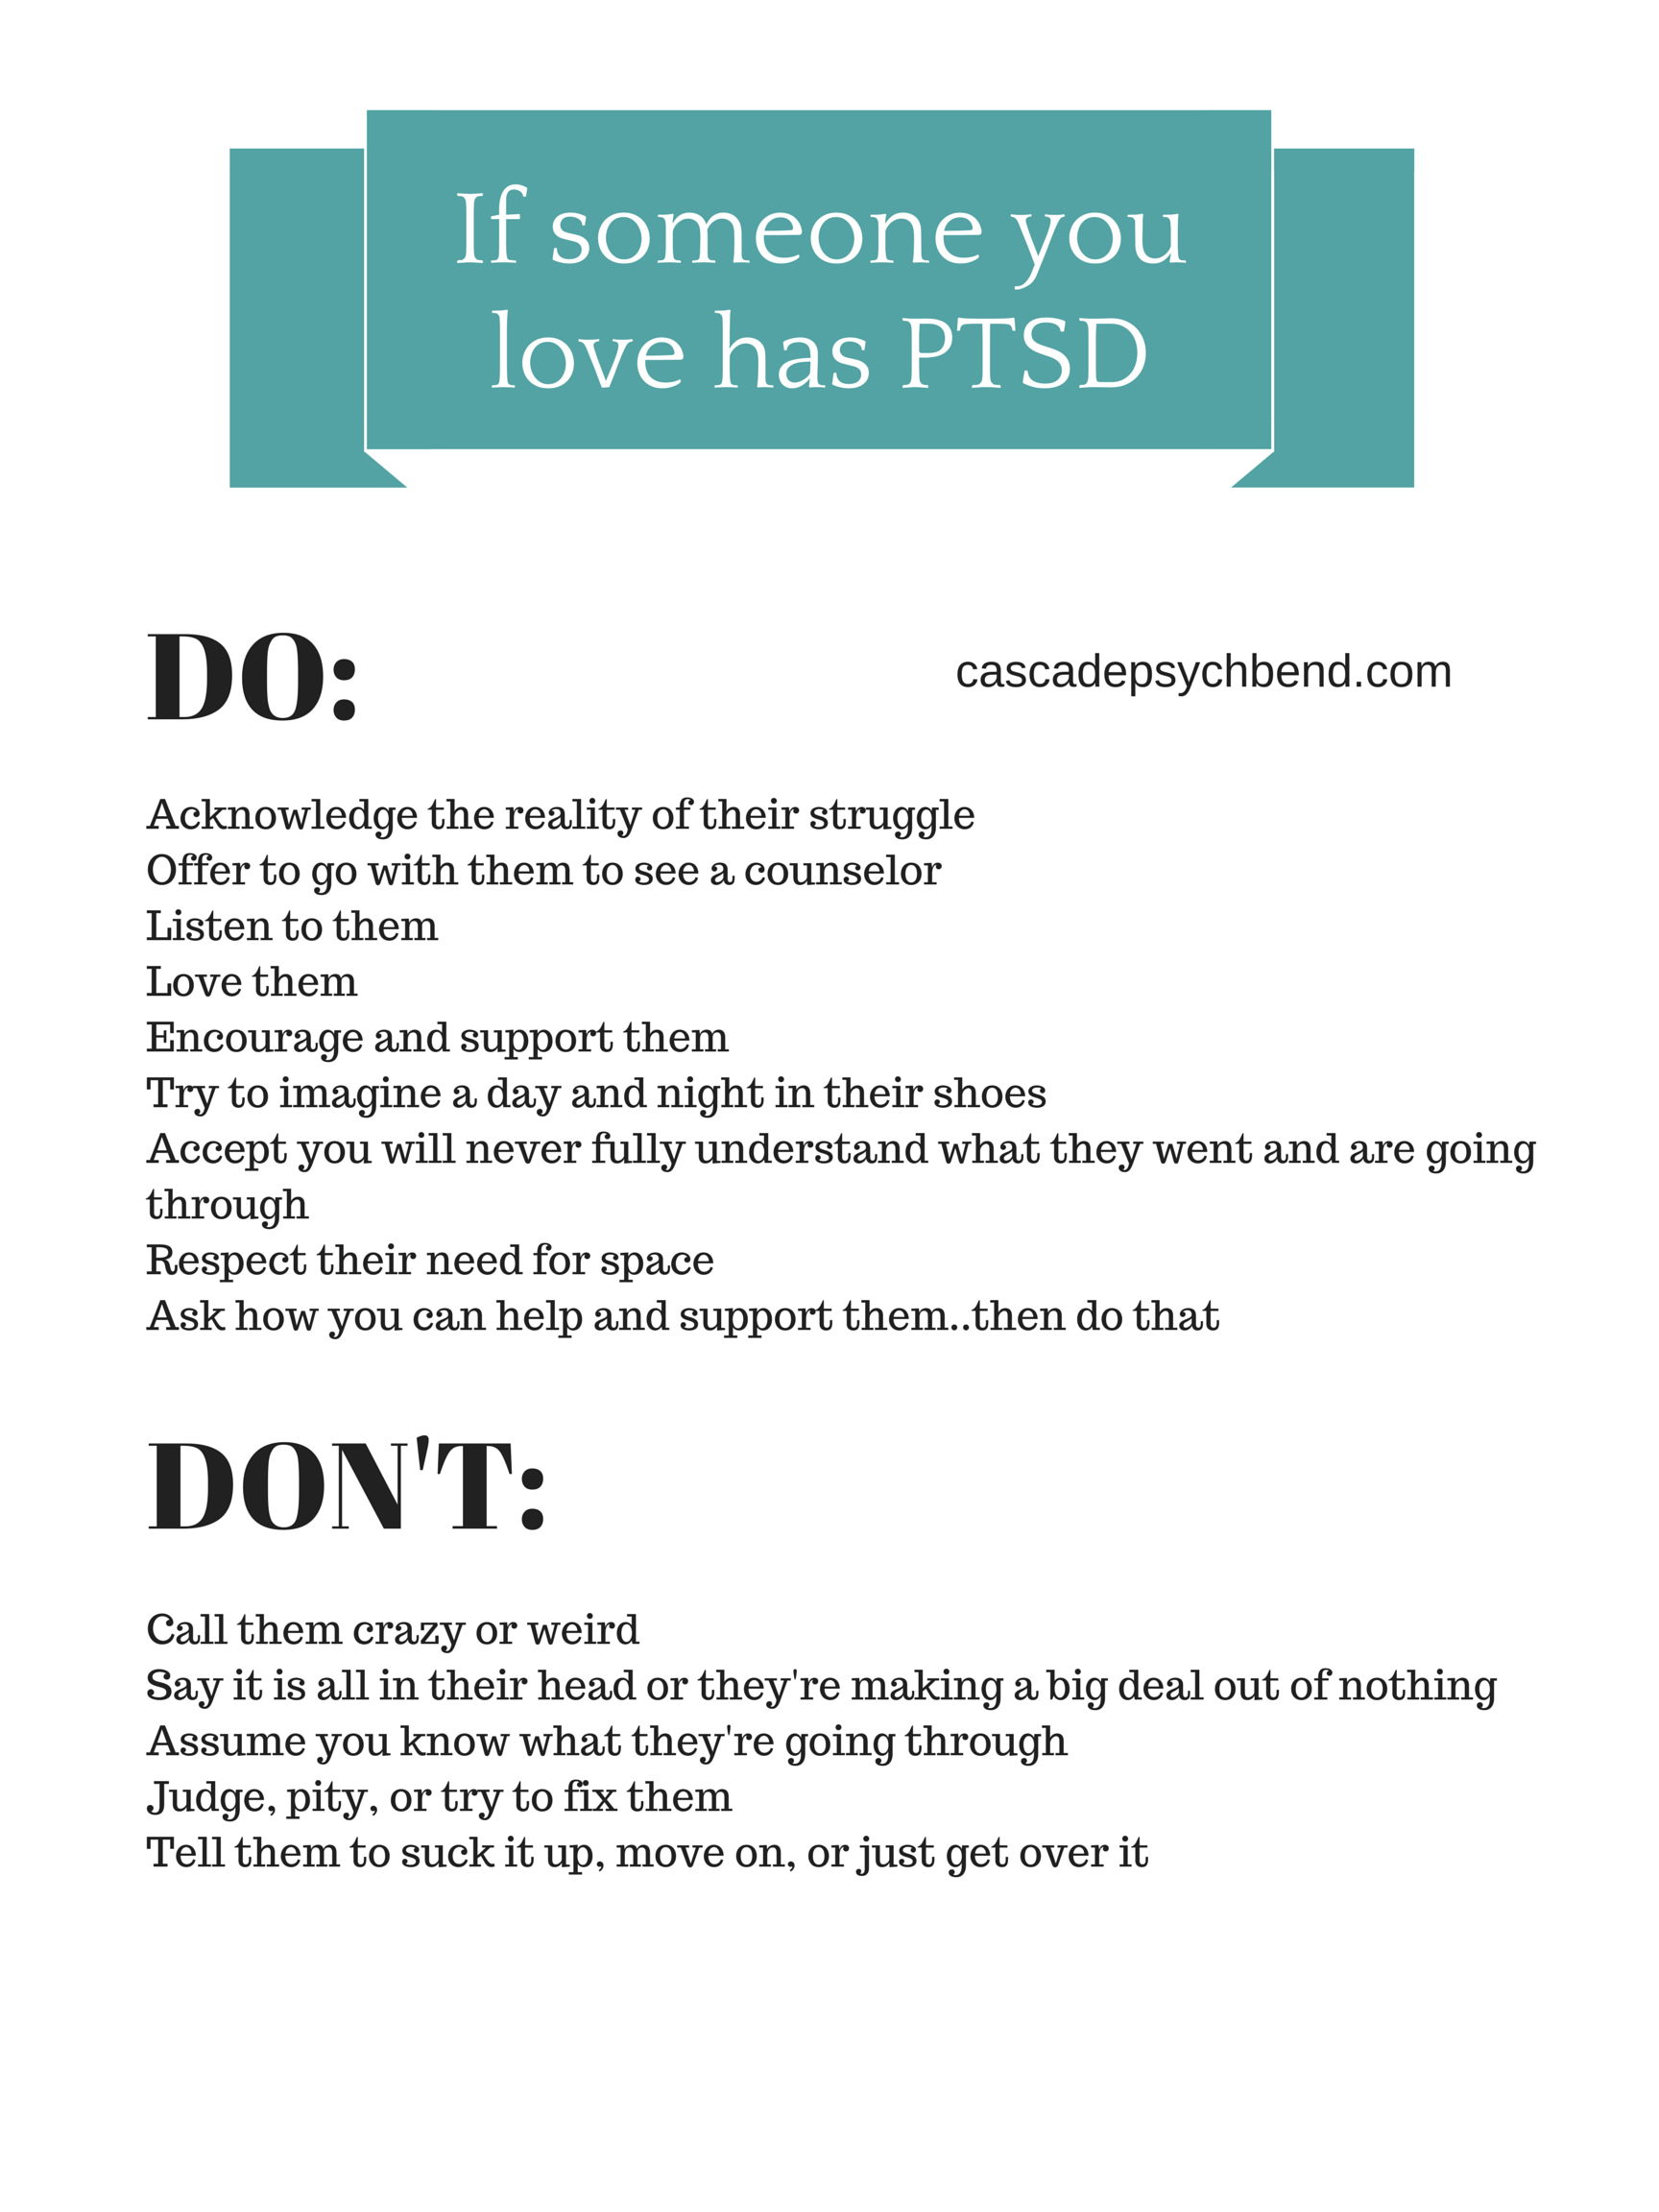 How To Help Someone With Ptsd